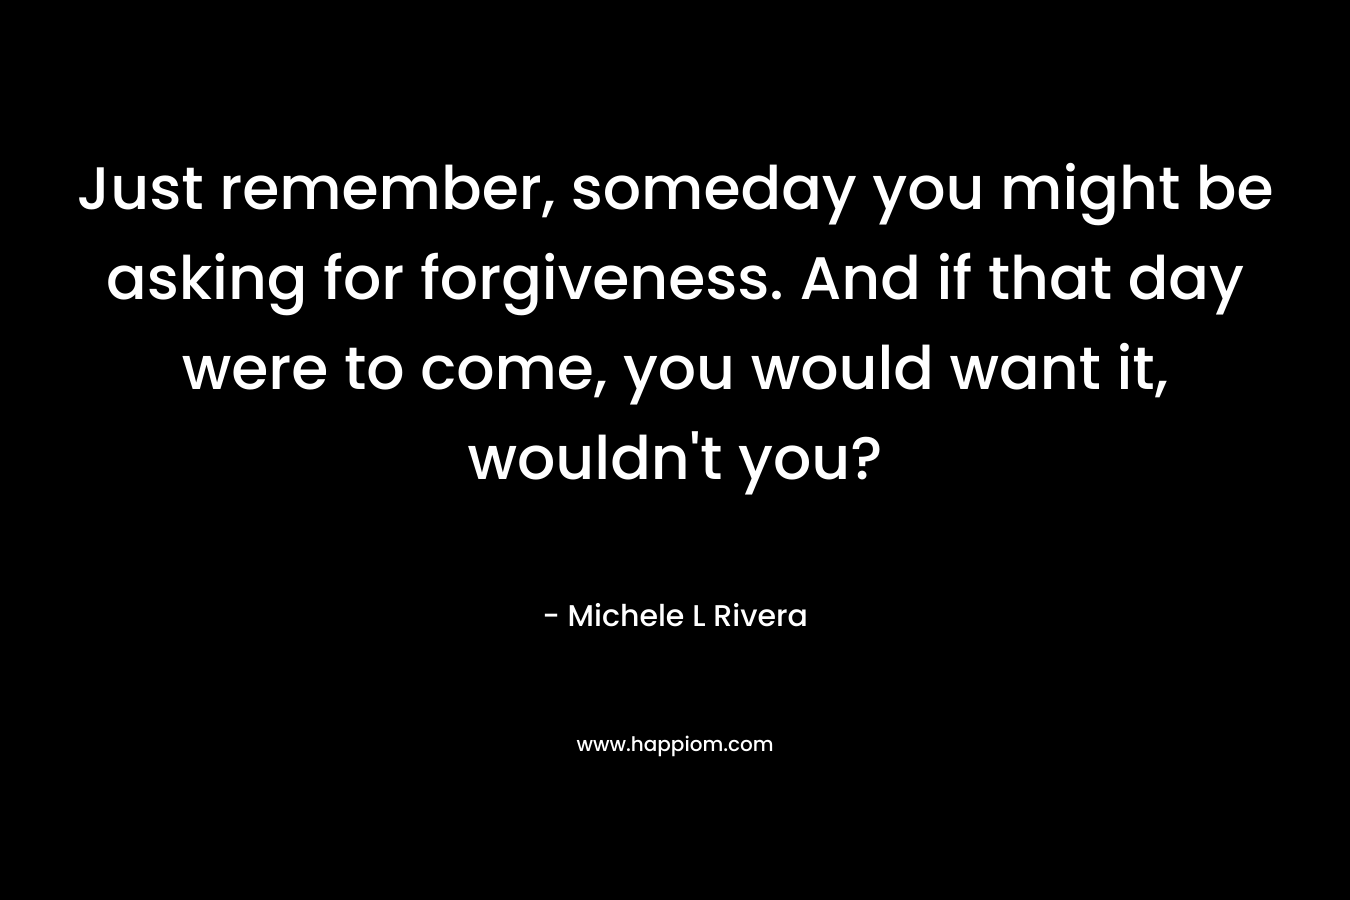 Just remember, someday you might be asking for forgiveness. And if that day were to come, you would want it, wouldn’t you? – Michele L Rivera